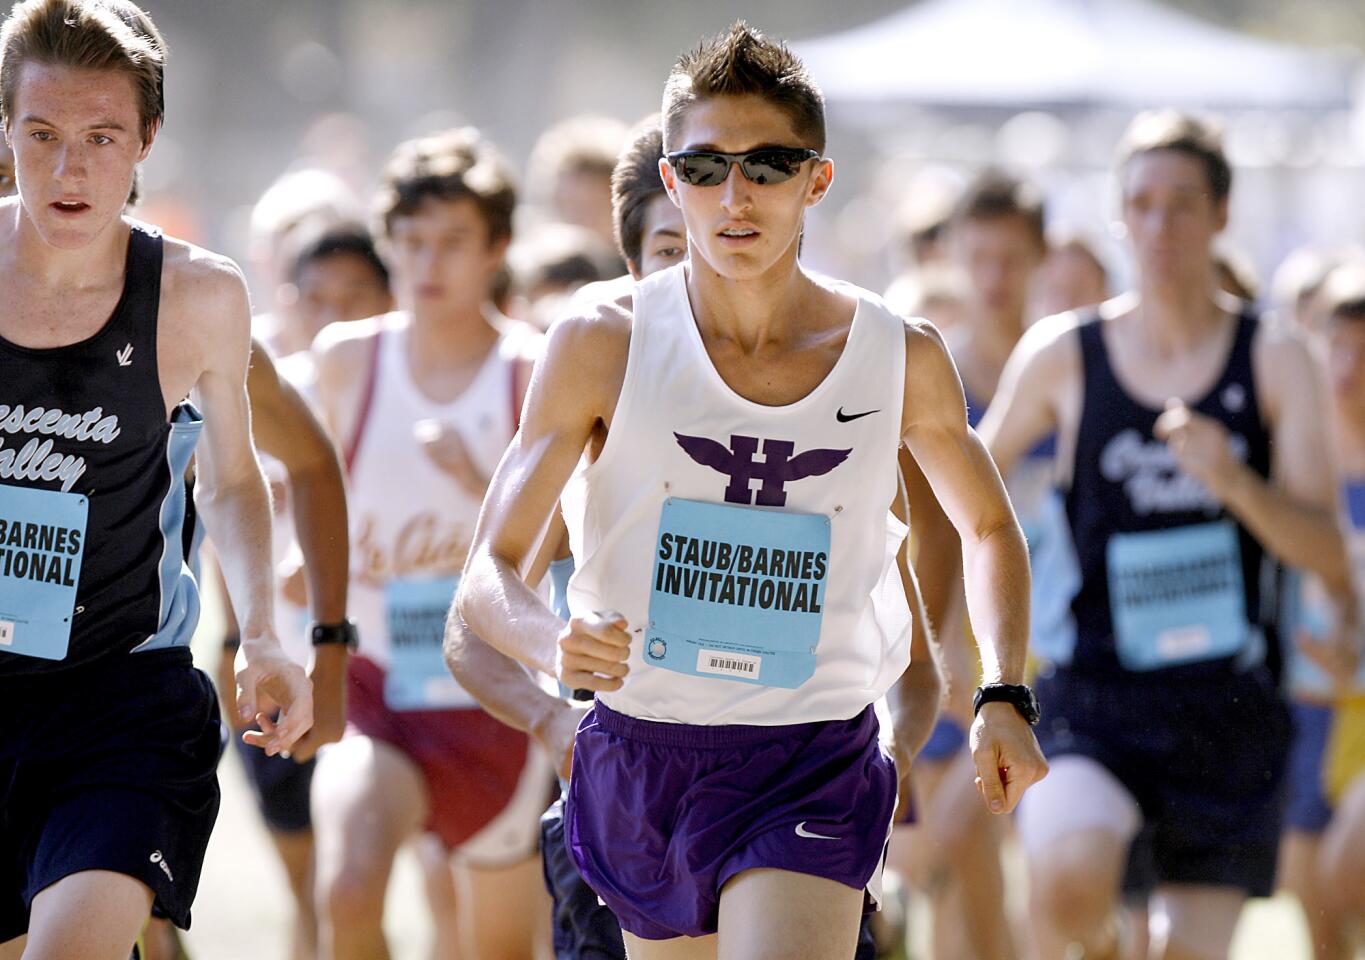 Hoover High's Jeremy Zadoorian, right, runs in the Staub Invitational Boys Div. I Varsity cross-country race at Crescenta Valley Park in La Crescenta on Saturday, Sept. 29, 2012. Crescenta Valley High's Gabe Collison is at left.